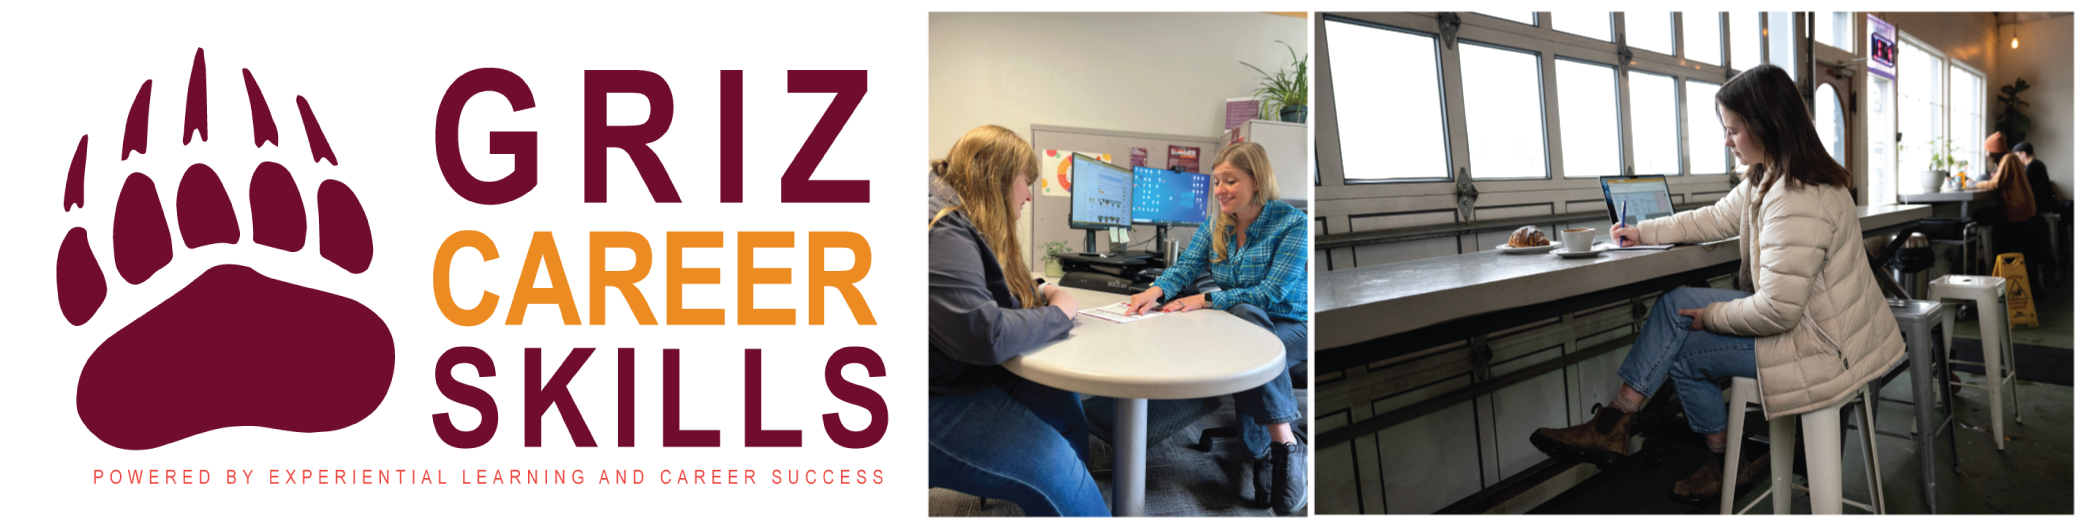 griz career skills logo and images of students